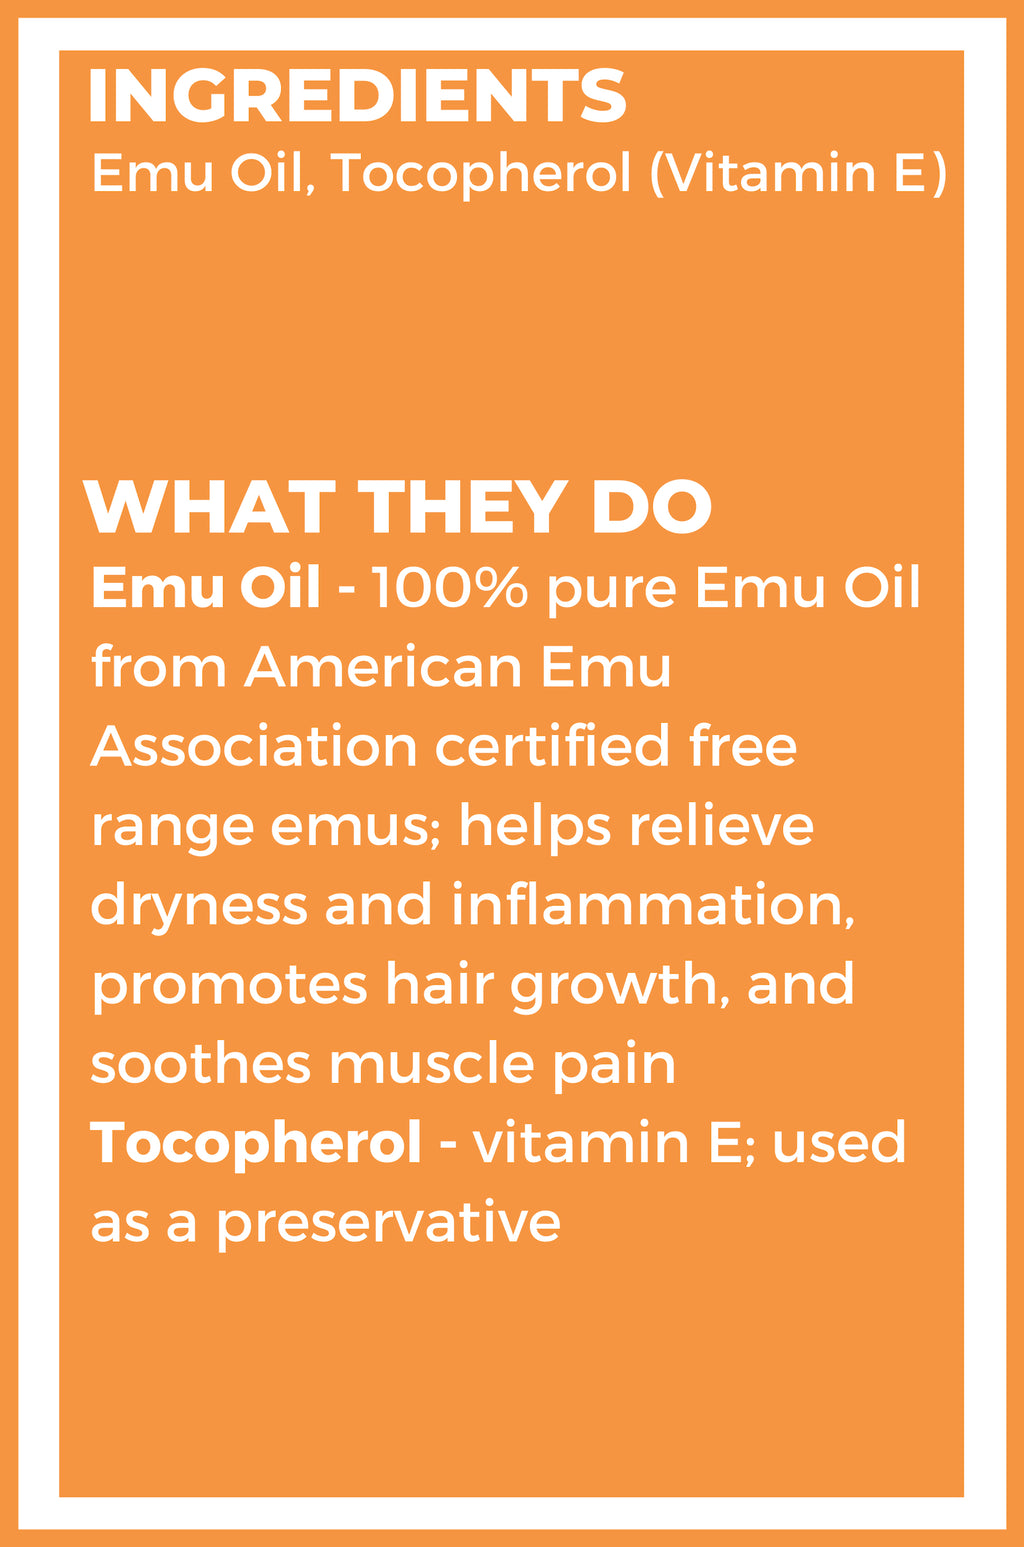 Emu Oil for Skin, Help for Eczema, and Dermatitis | Cleure